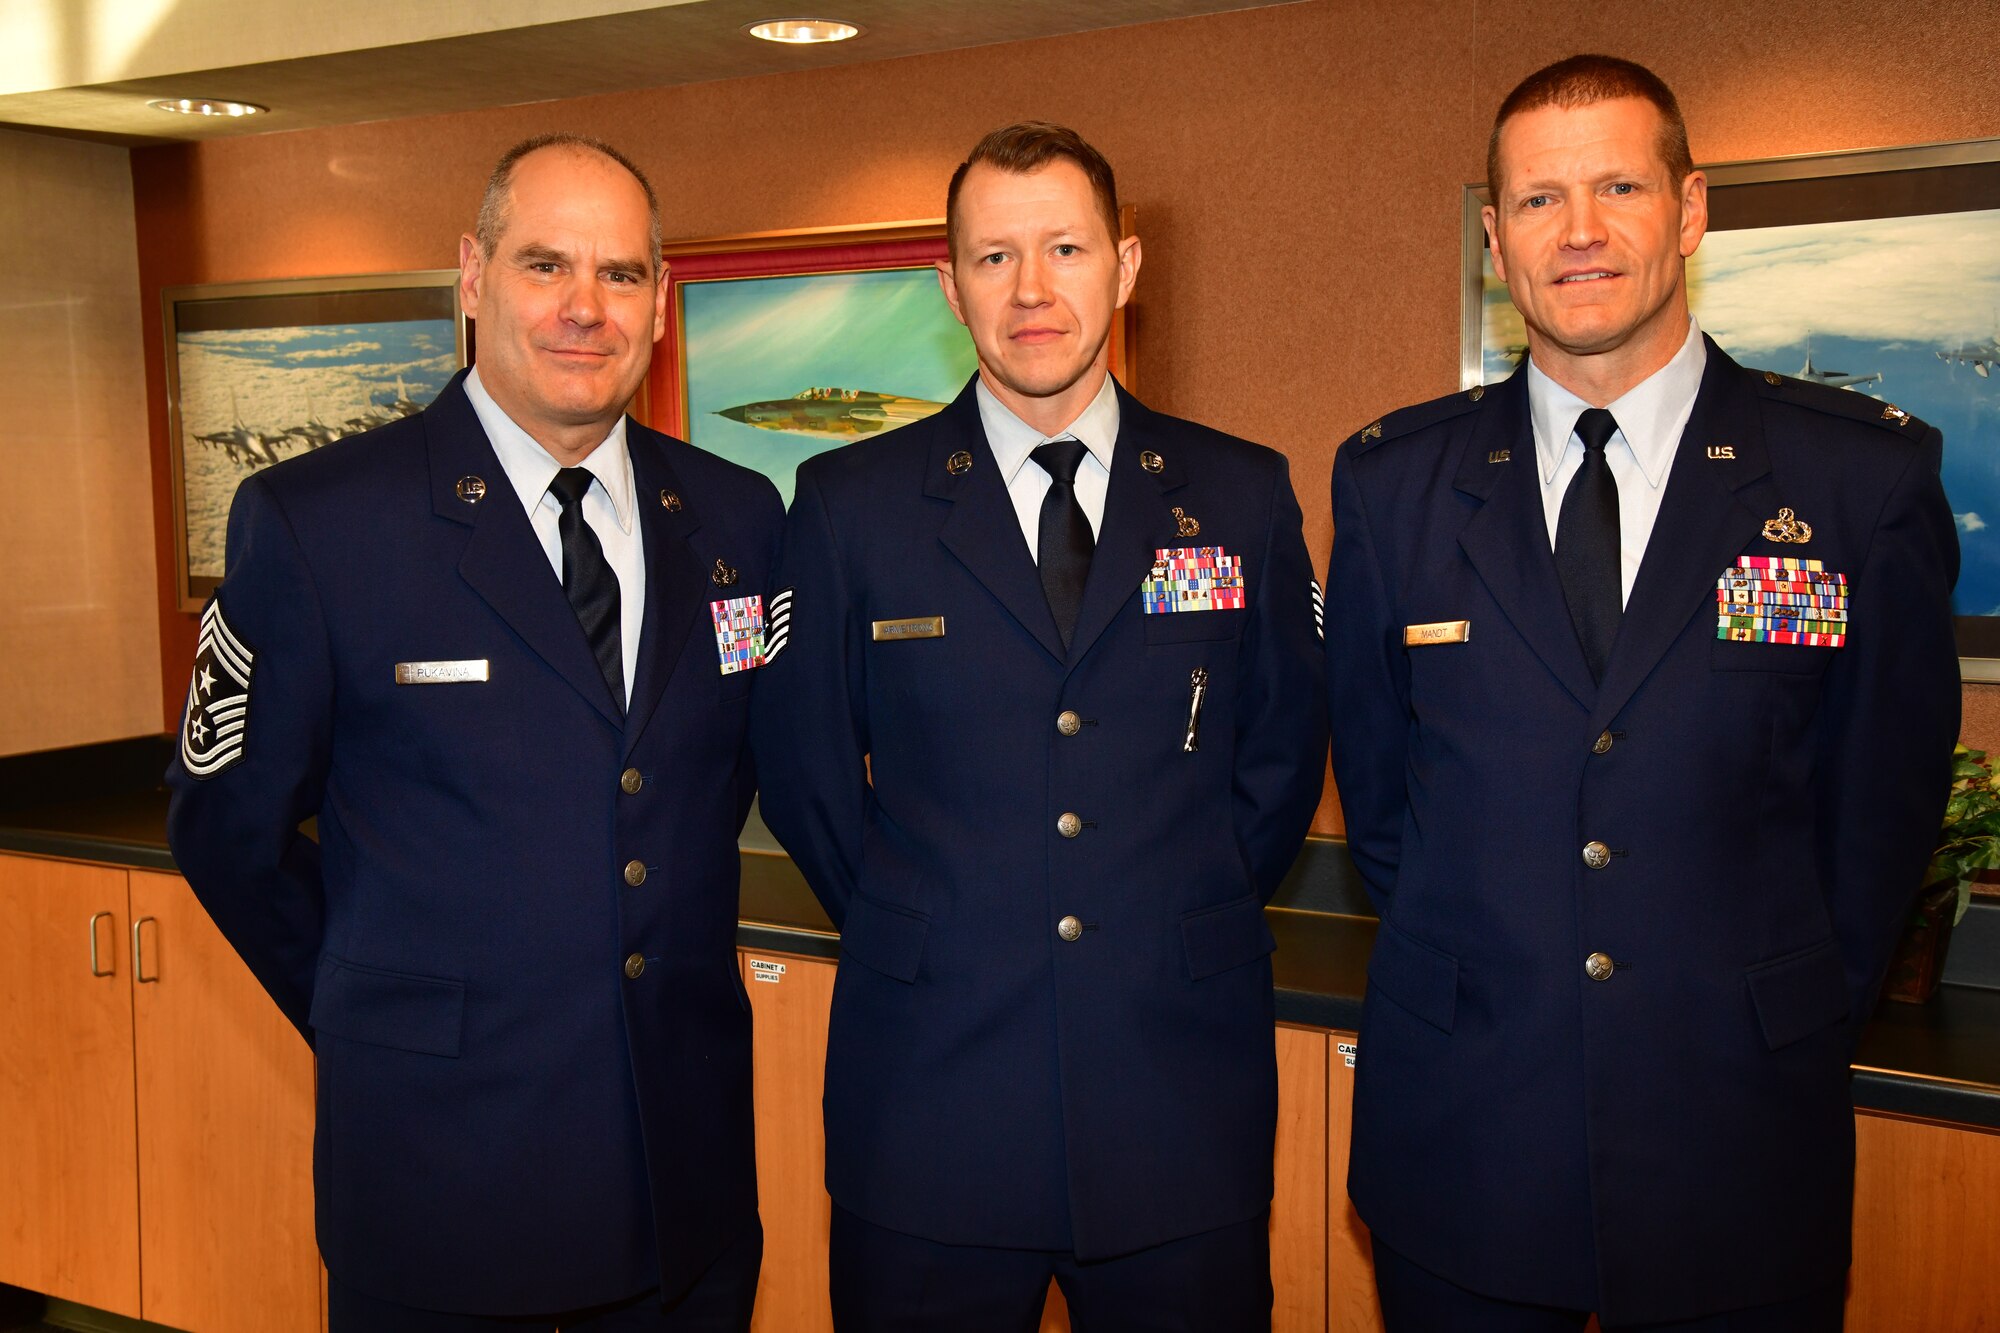 Master Sgt. Chris Armstrong, Minnesota Air National Guard First Sergeant of the Year